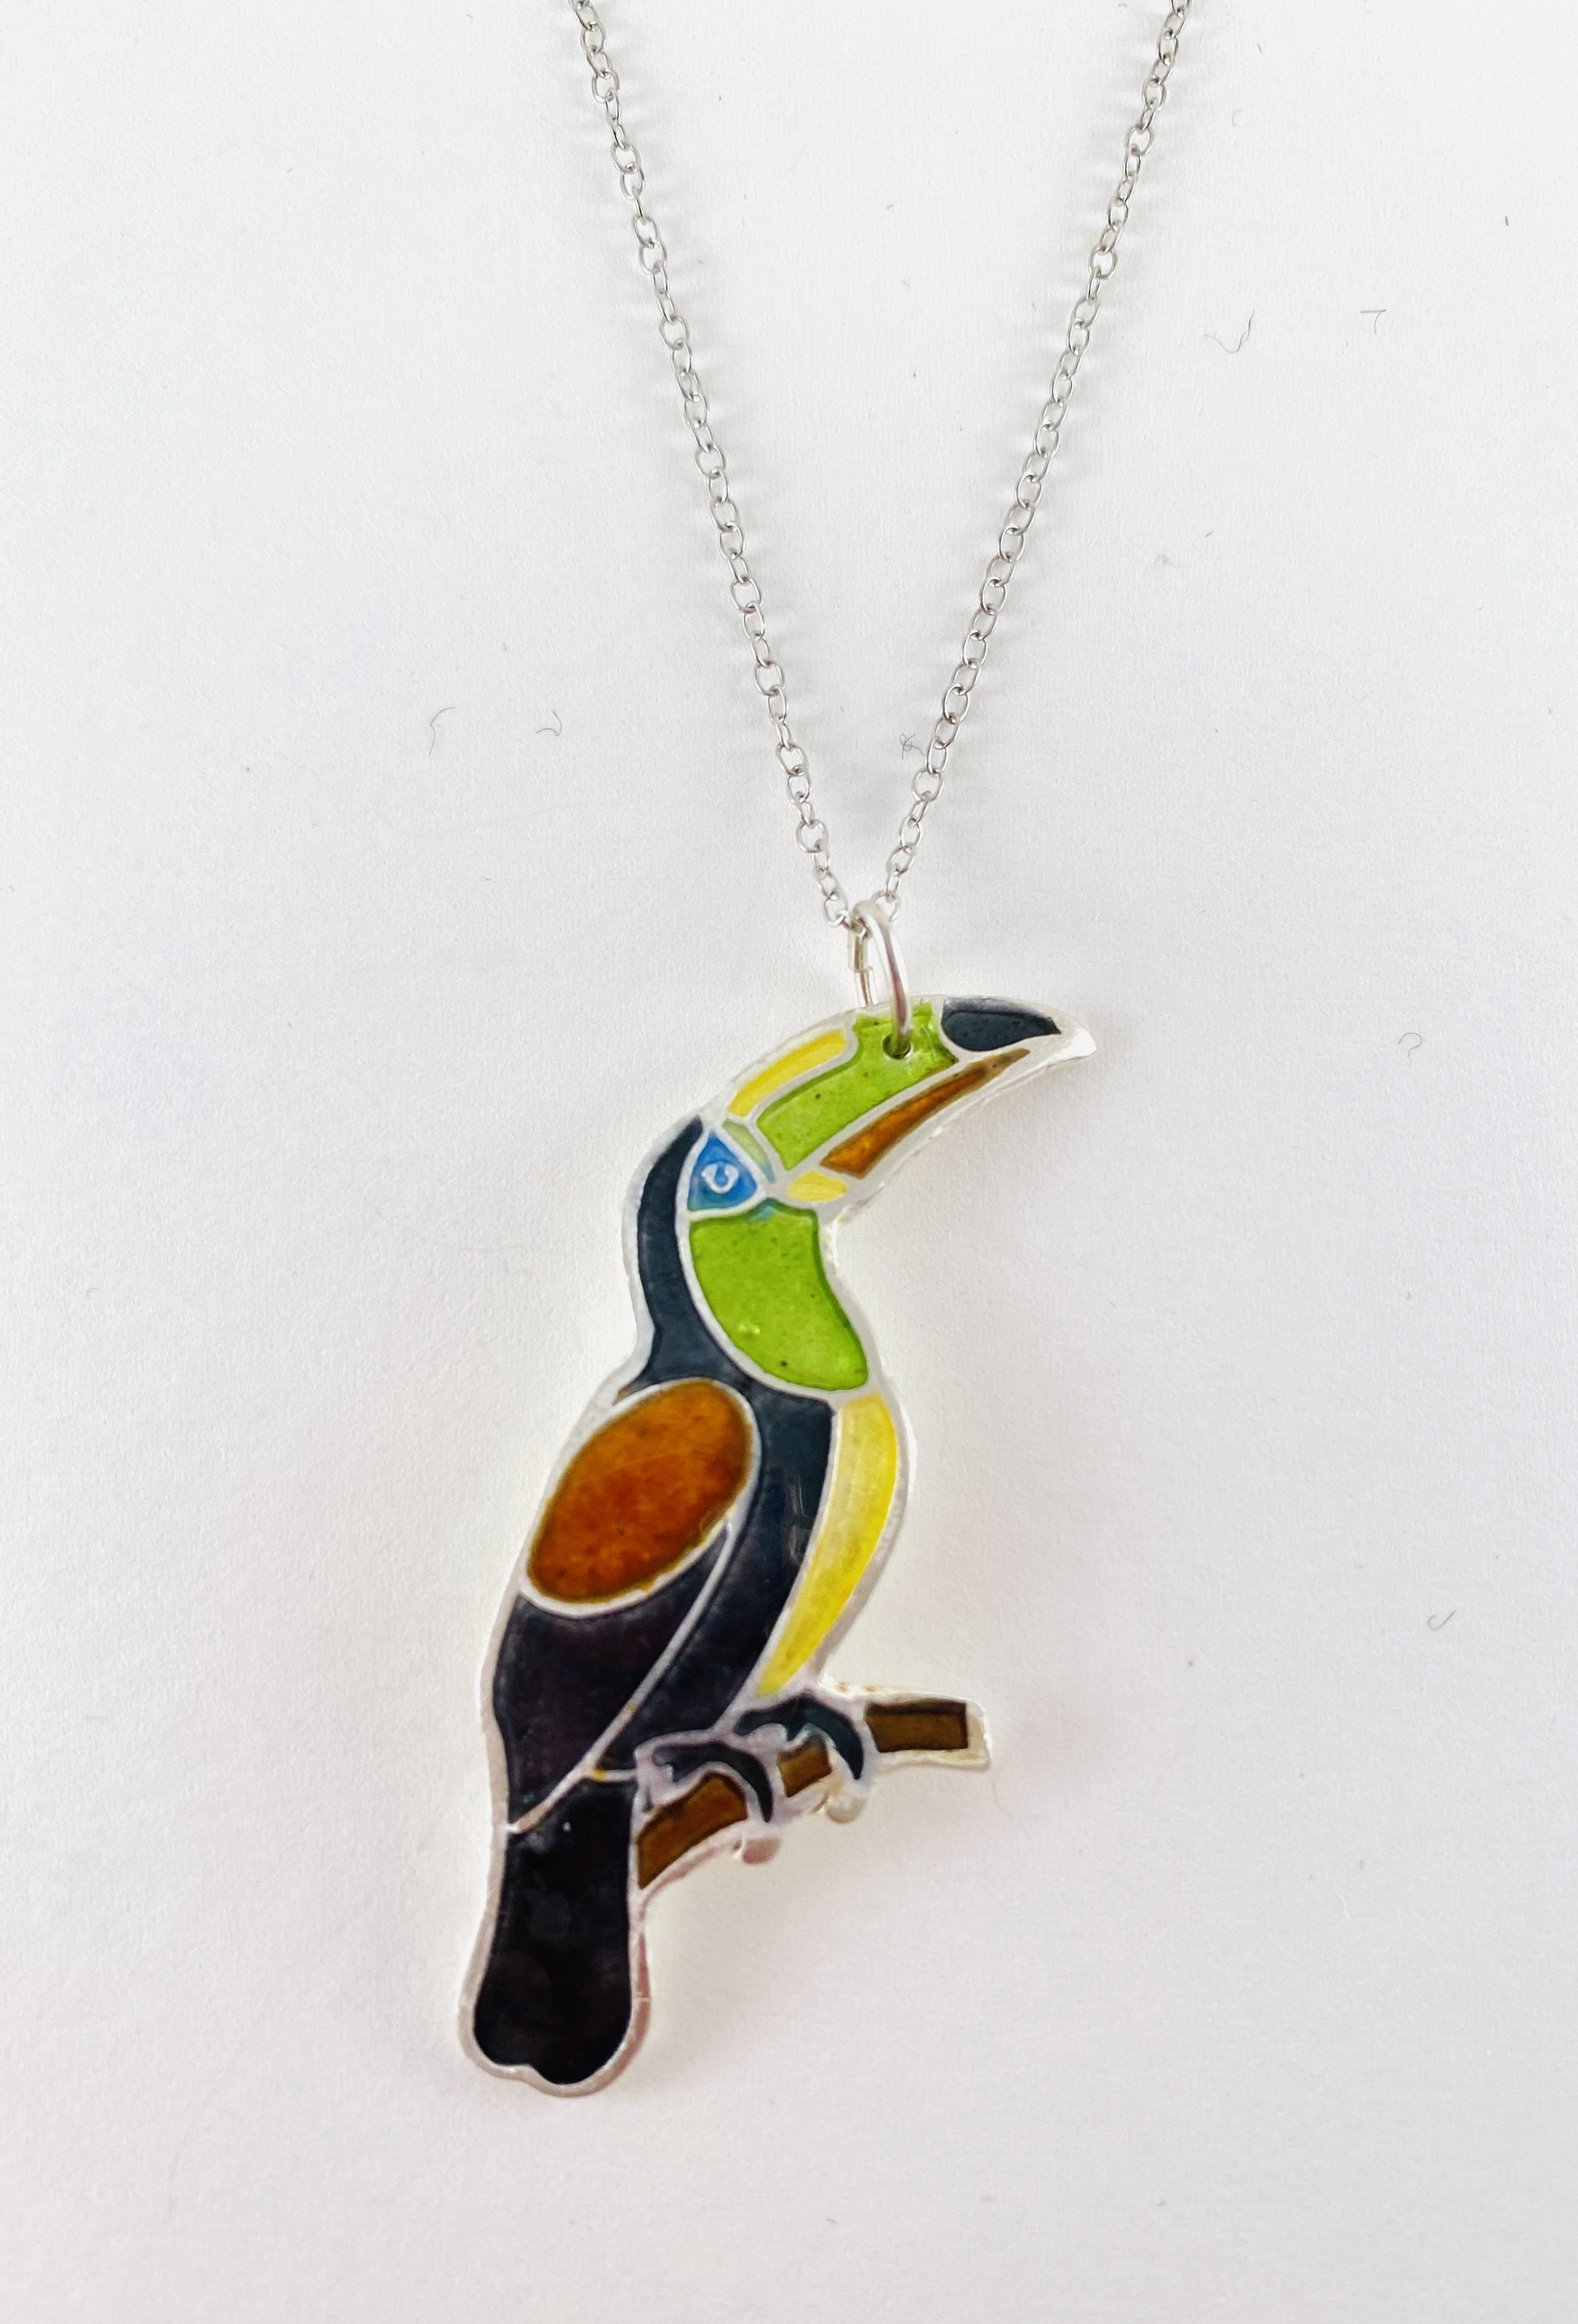 Champleve Toucan Pendant, 18" Silver Chain Necklace by Karen Hakim